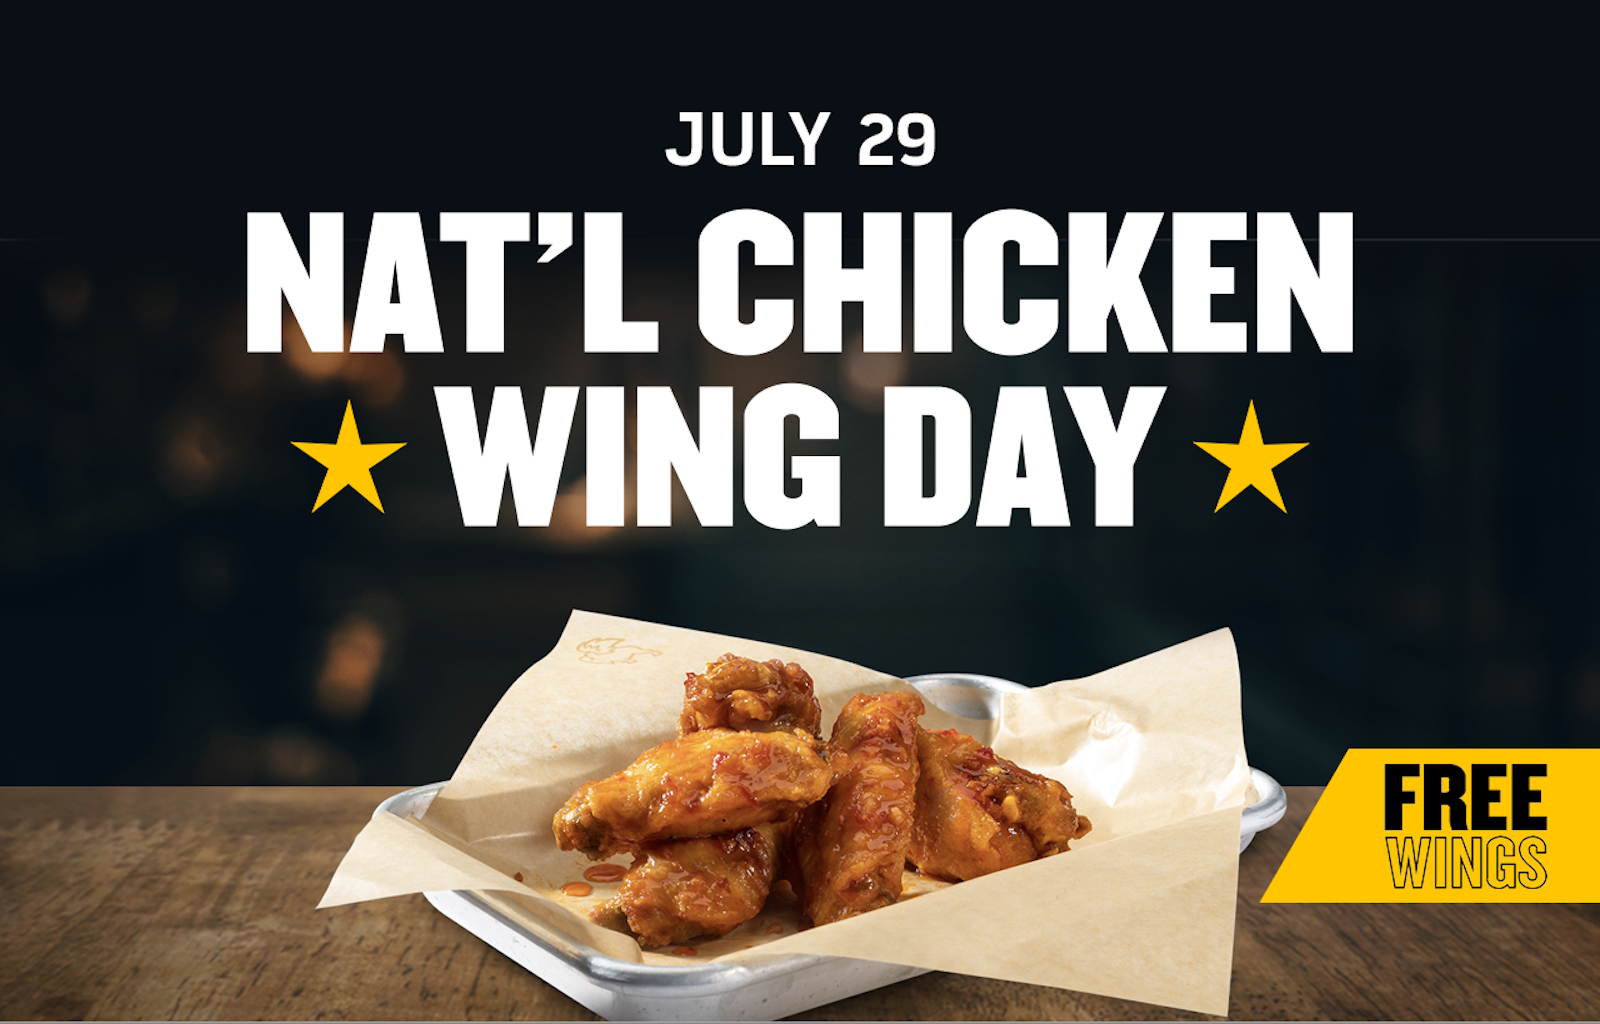 Fans Can Score Free Wings With Wing Purchase At BWW On National Wing Day